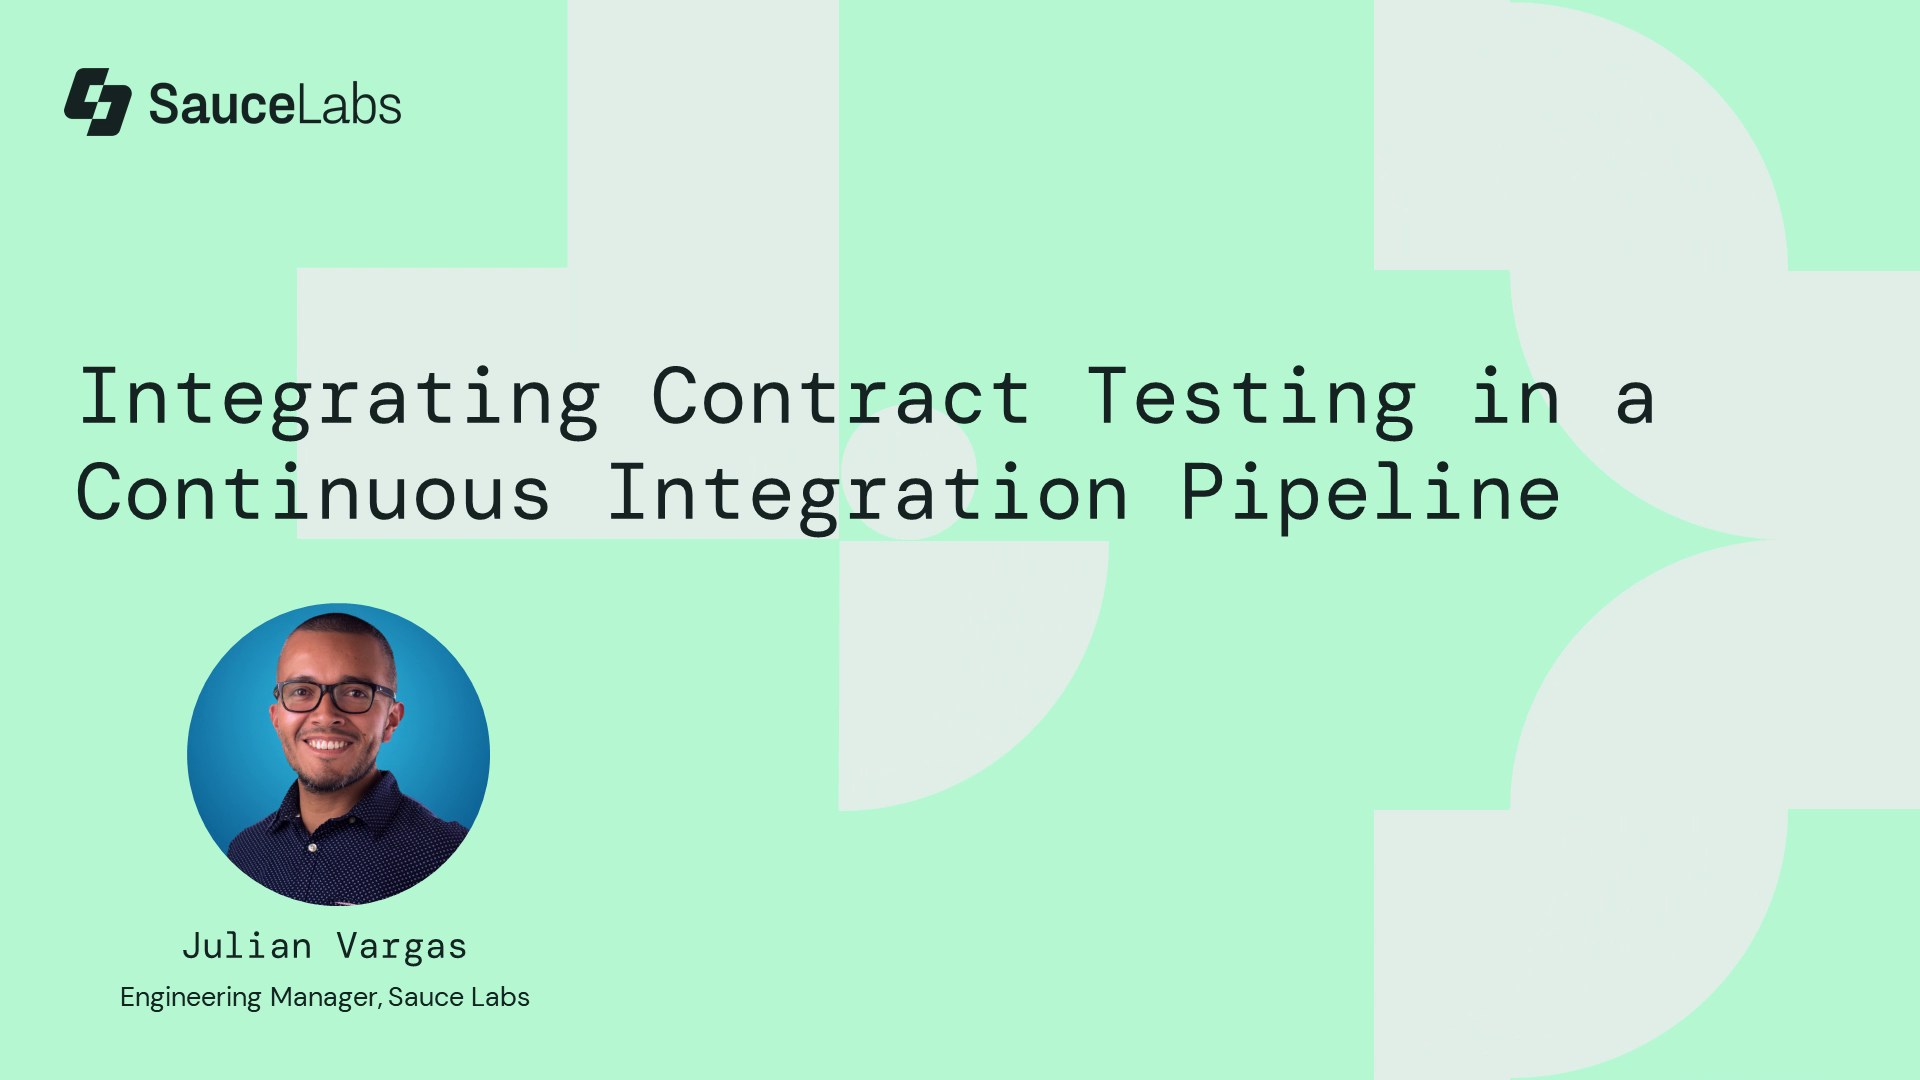 Integrating Contract Testing in a Continuous Integration Pipeline video